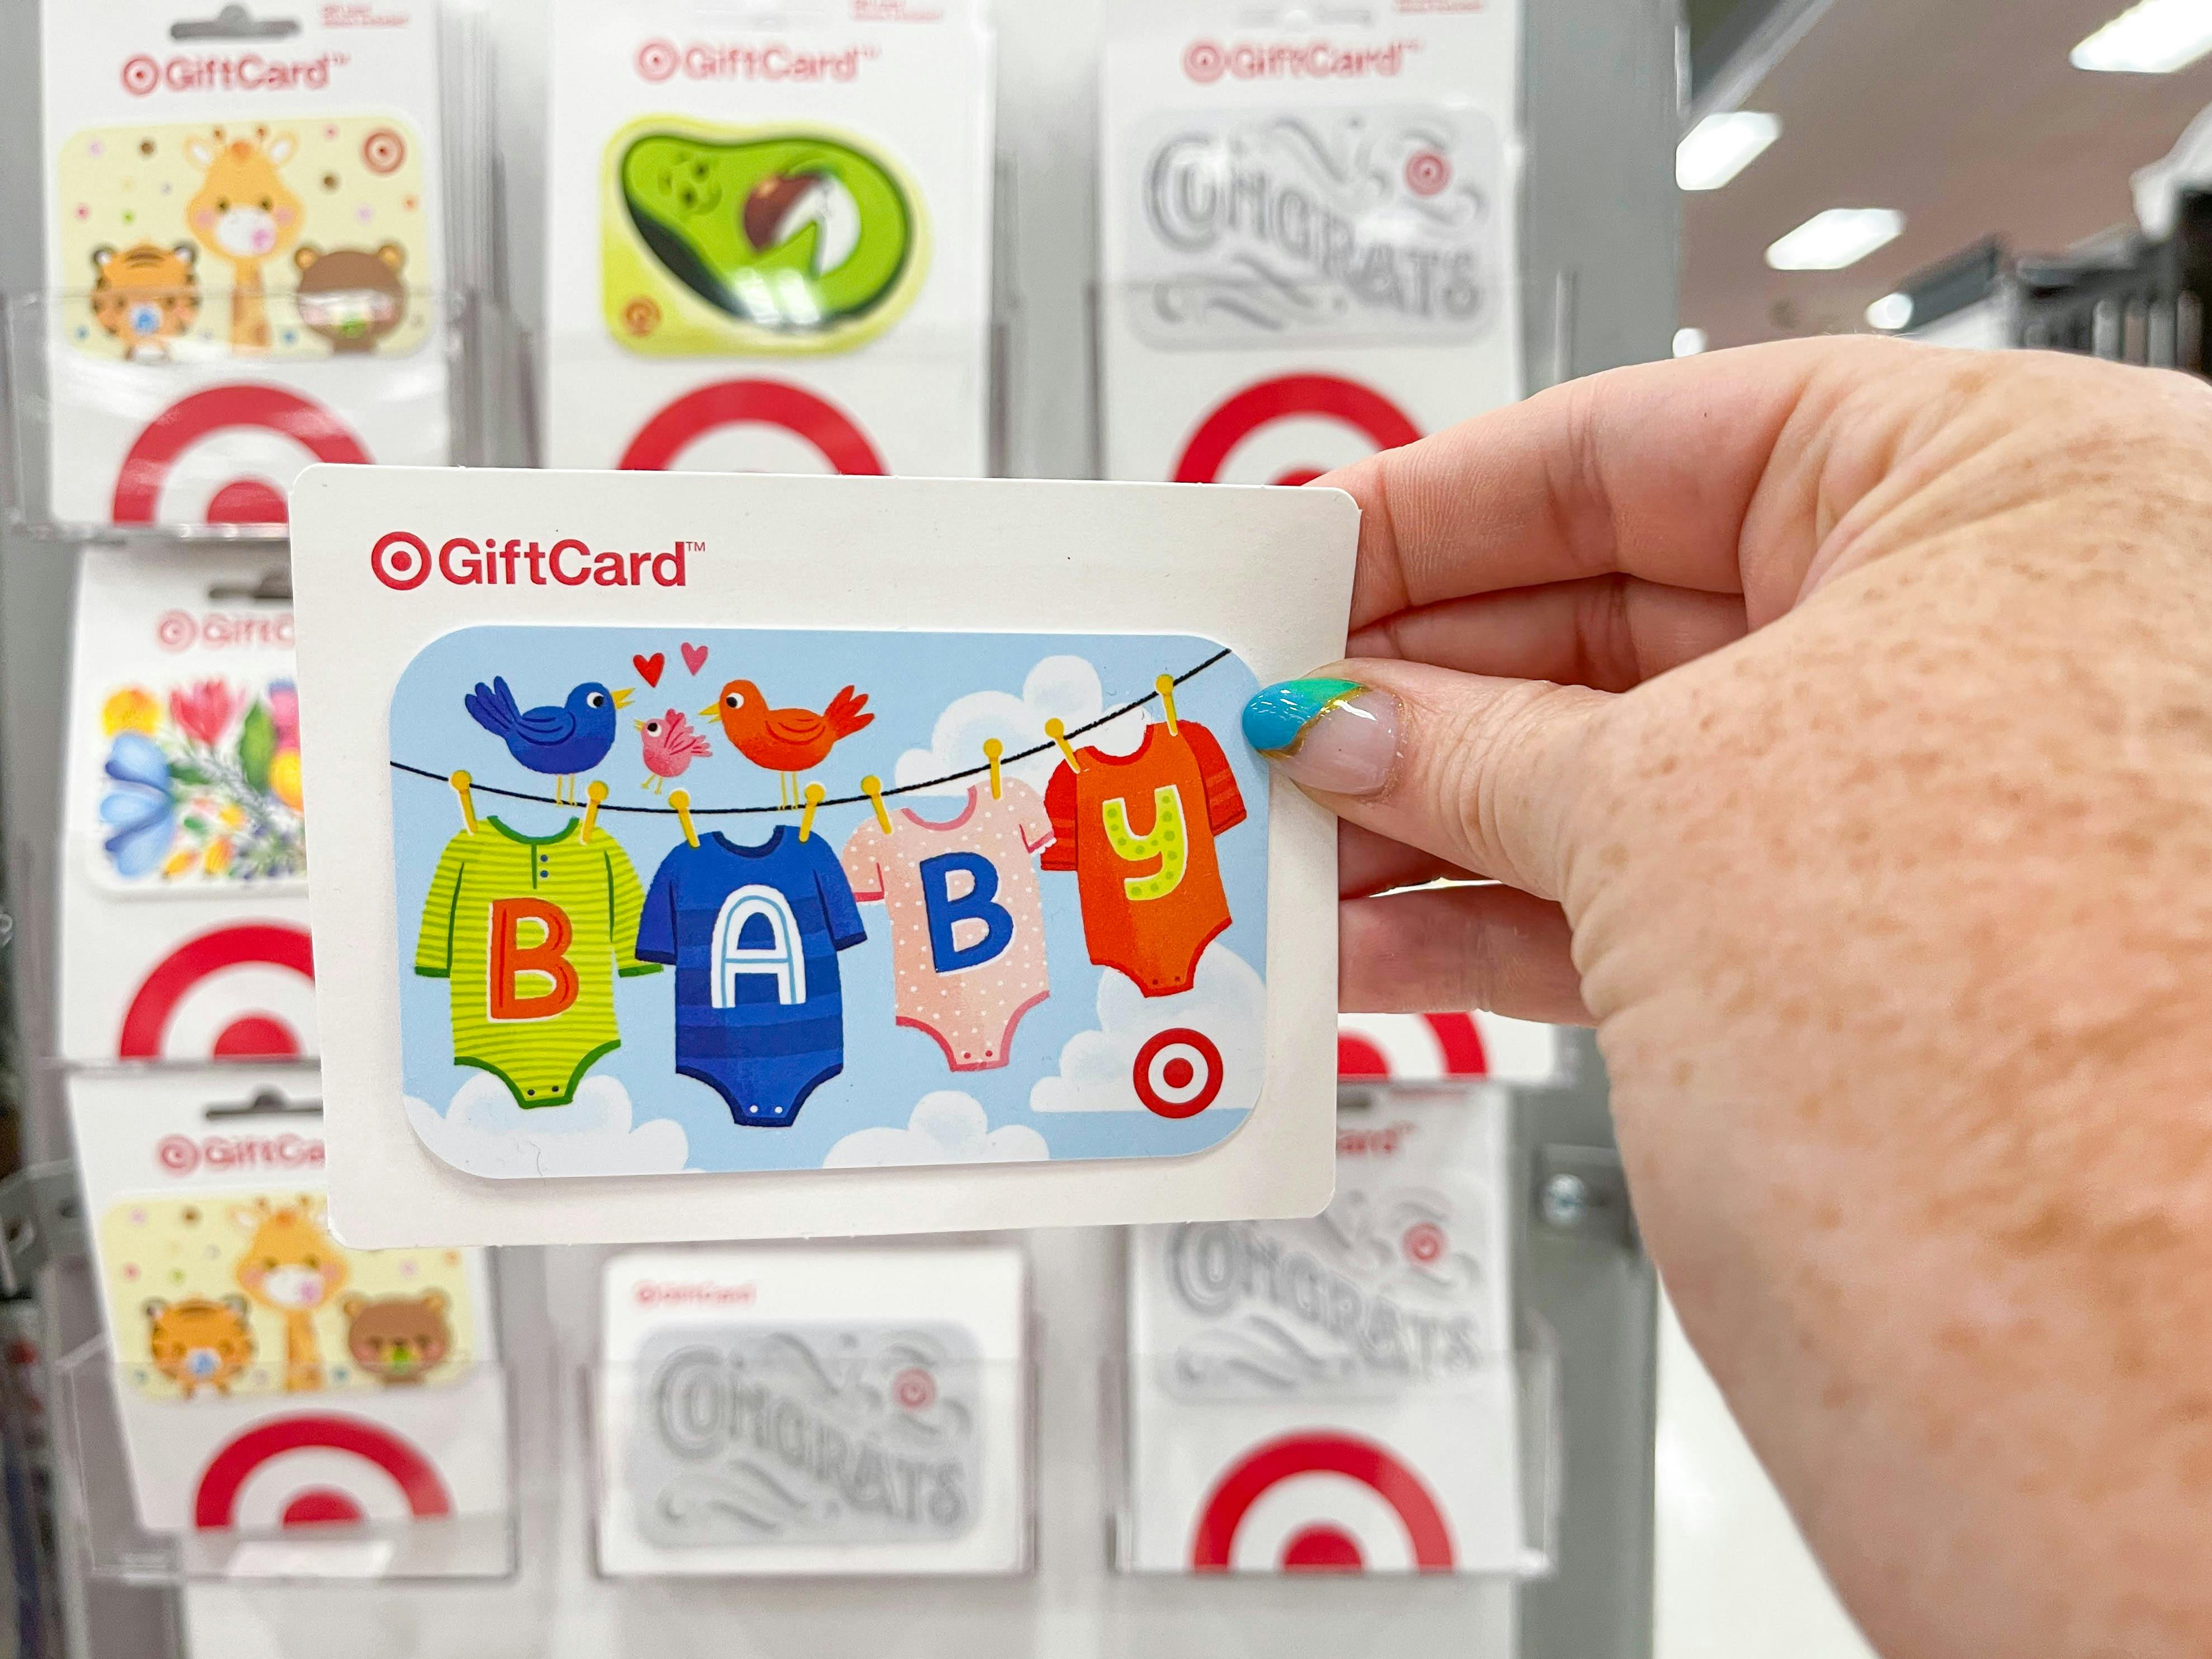 A person's hand holding up a baby-themed Target gift card in front of a display of gift cards.